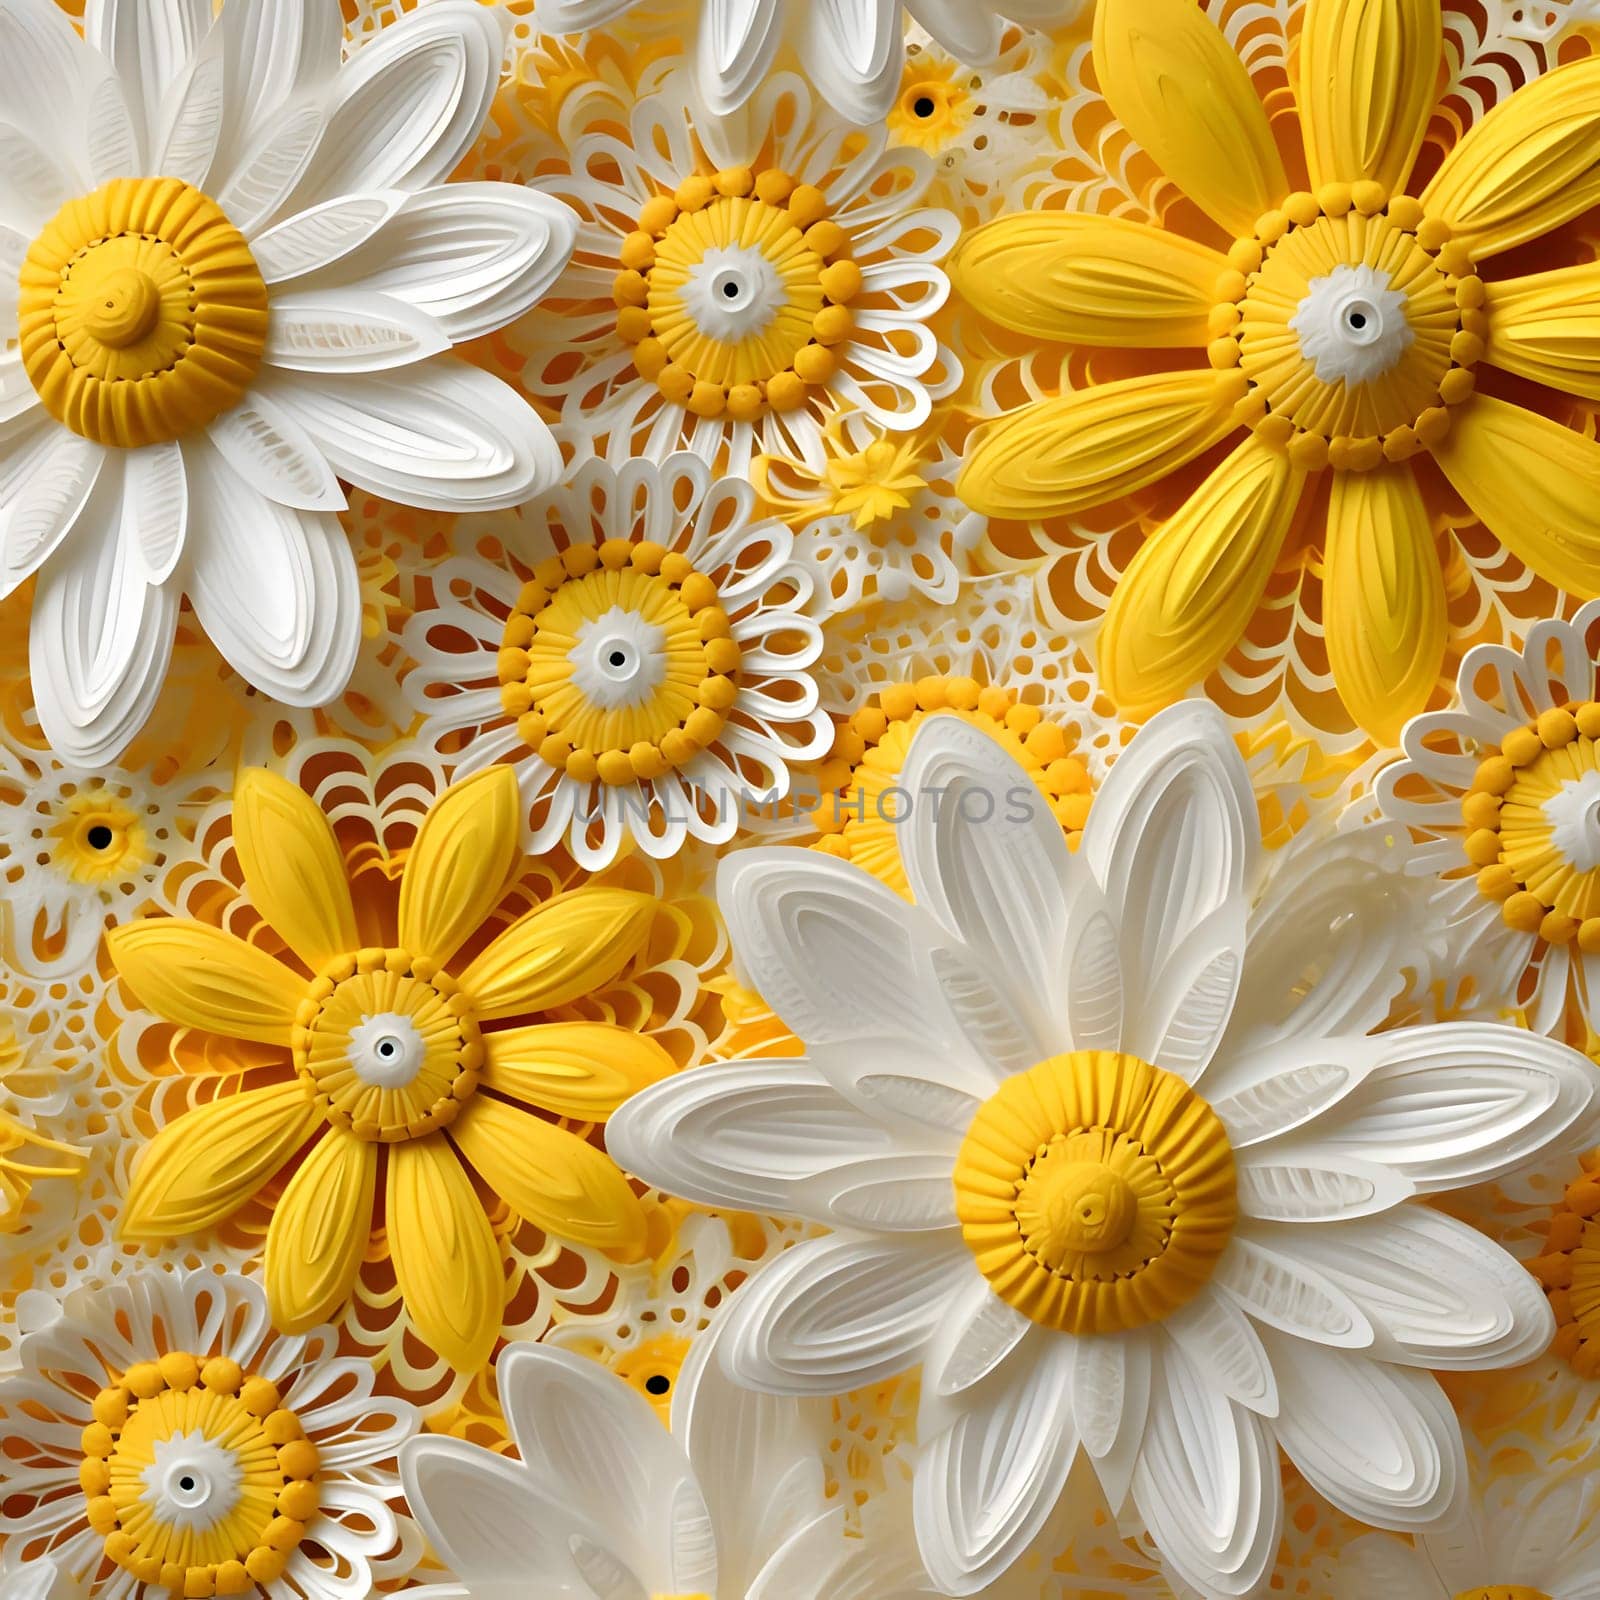 Floral pattern of white and yellow daisies on a white background by ThemesS